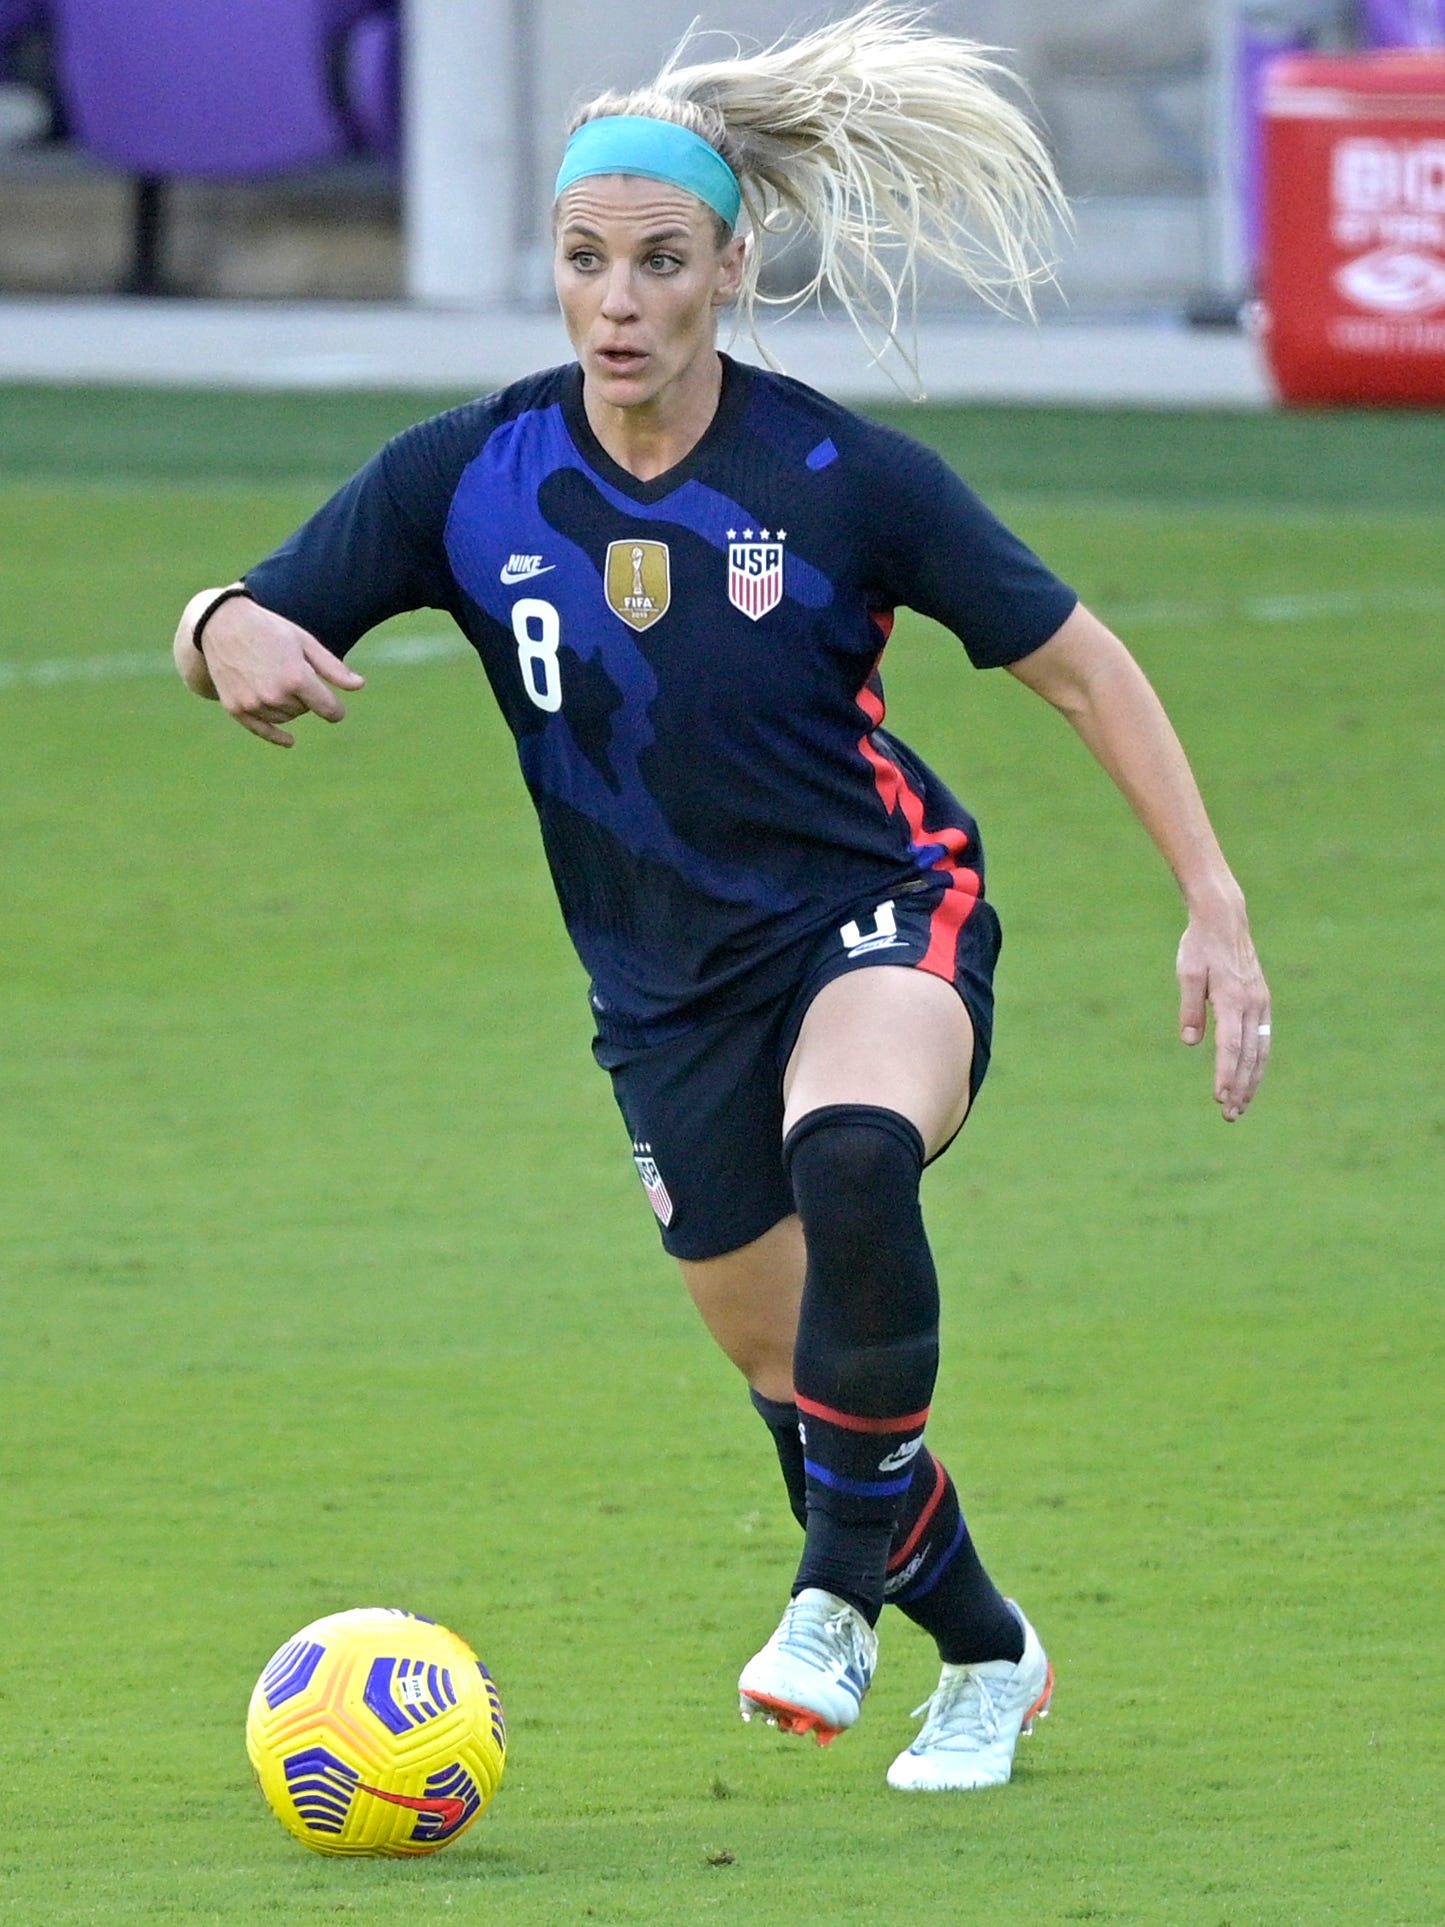 An action image of Julie Ertz playing soccer.